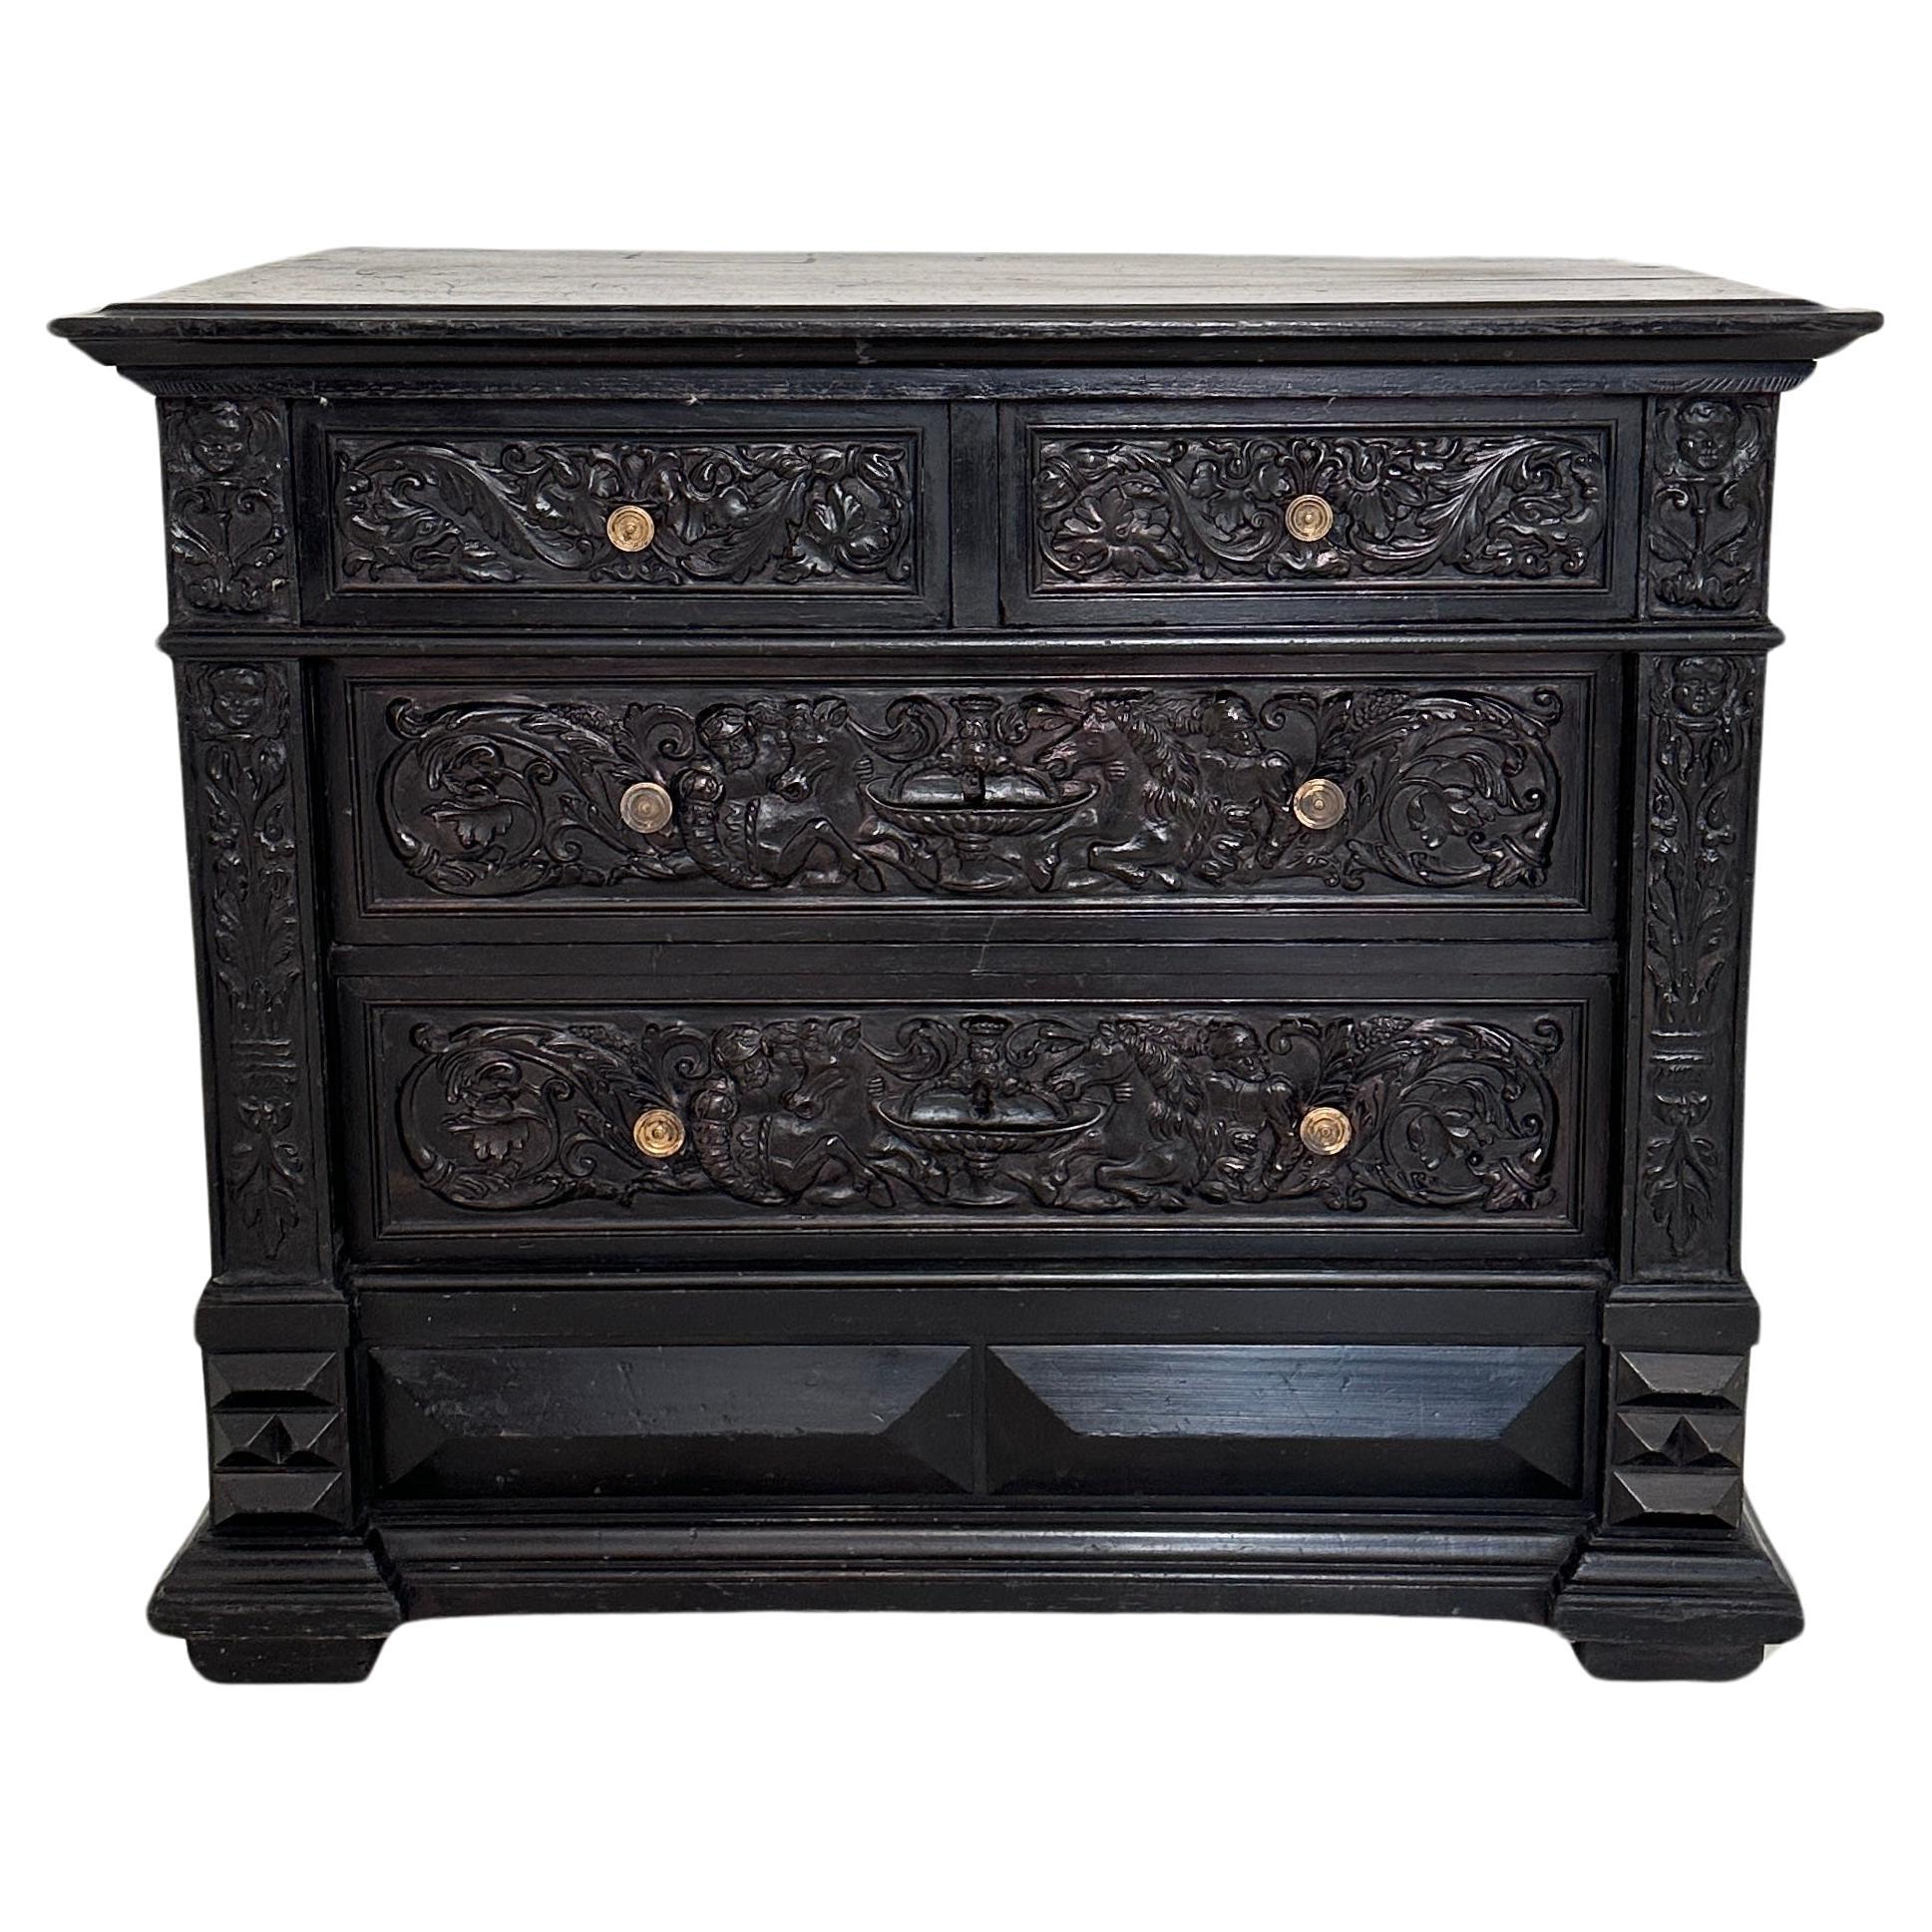 19th Century German Renaissance-Style Chest of Drawers in Black, around 1880 For Sale